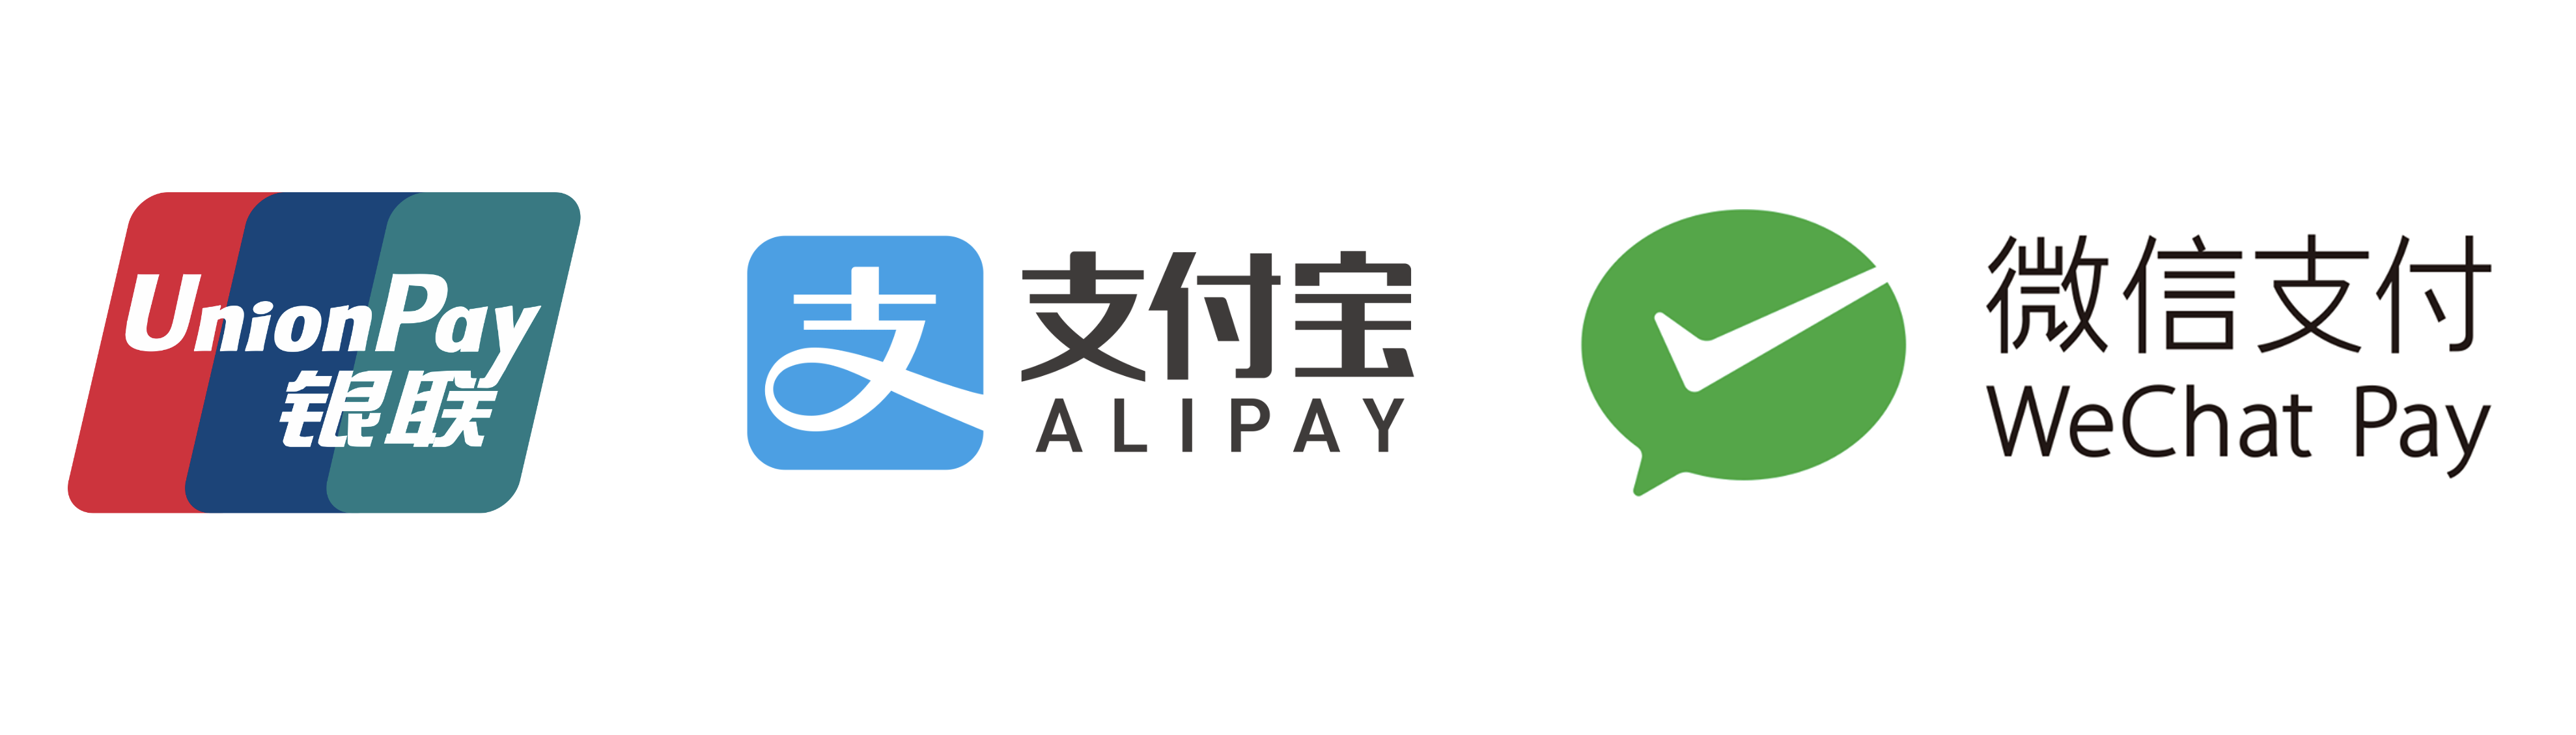 UnionPay, Alipay, Wechat pay - GMT Global Money Transfer - Partner